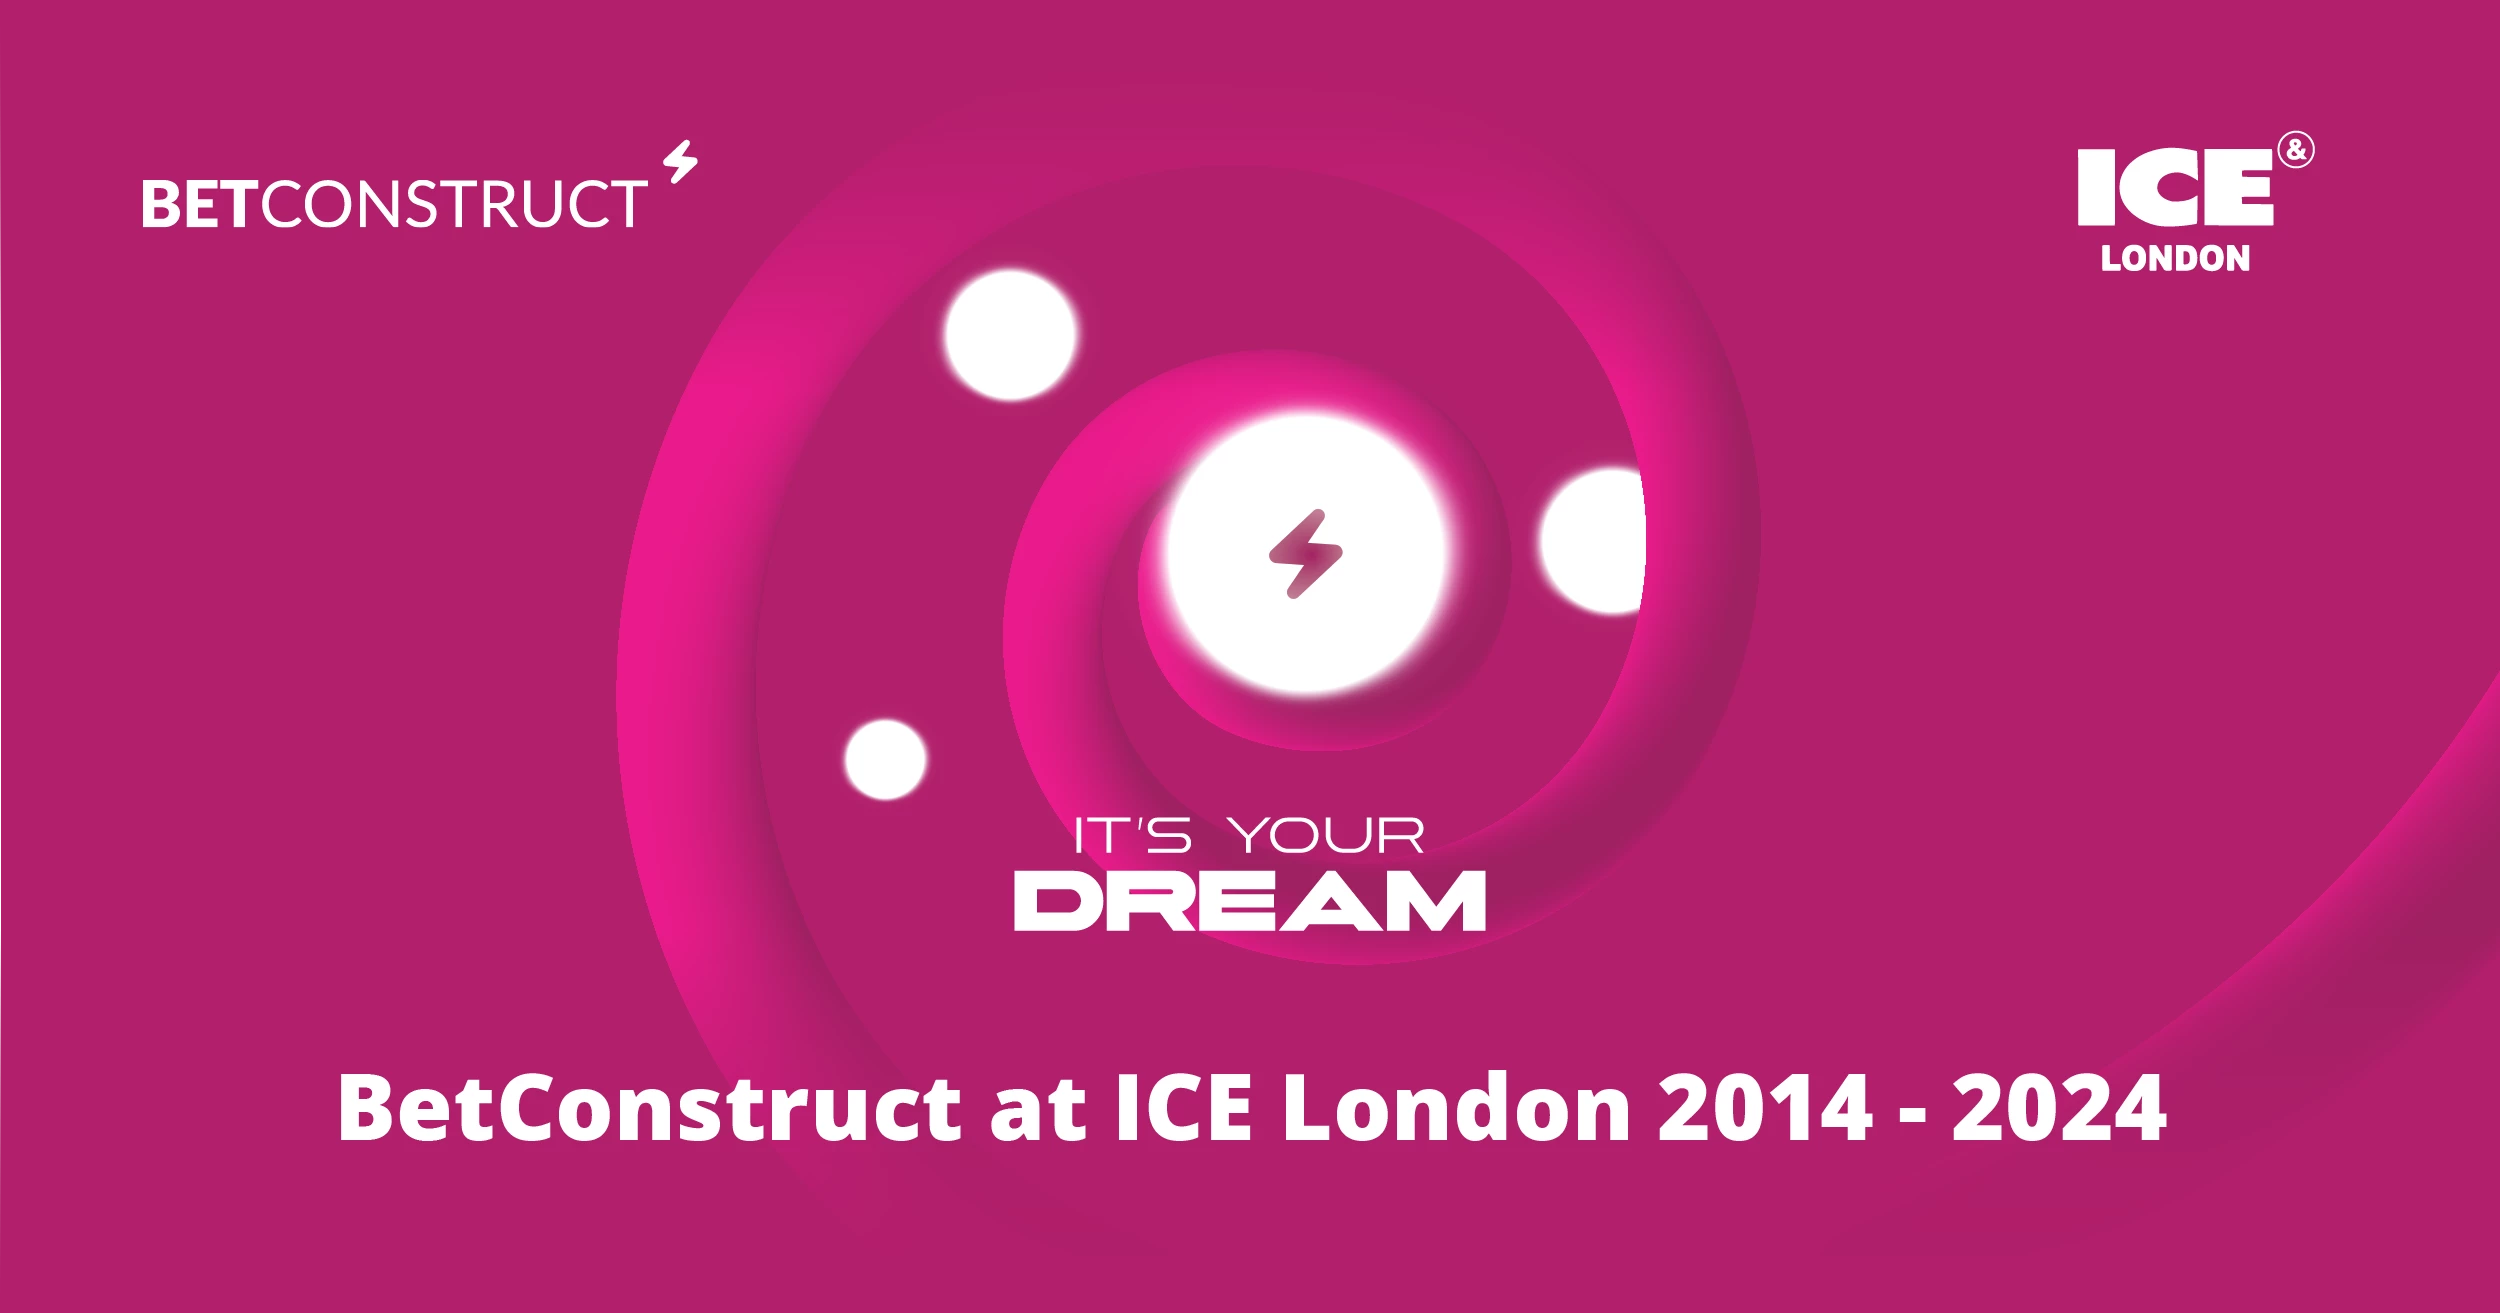 A Decade of iGaming Excellence: BetConstruct's Journey in ICE London 2014-2024